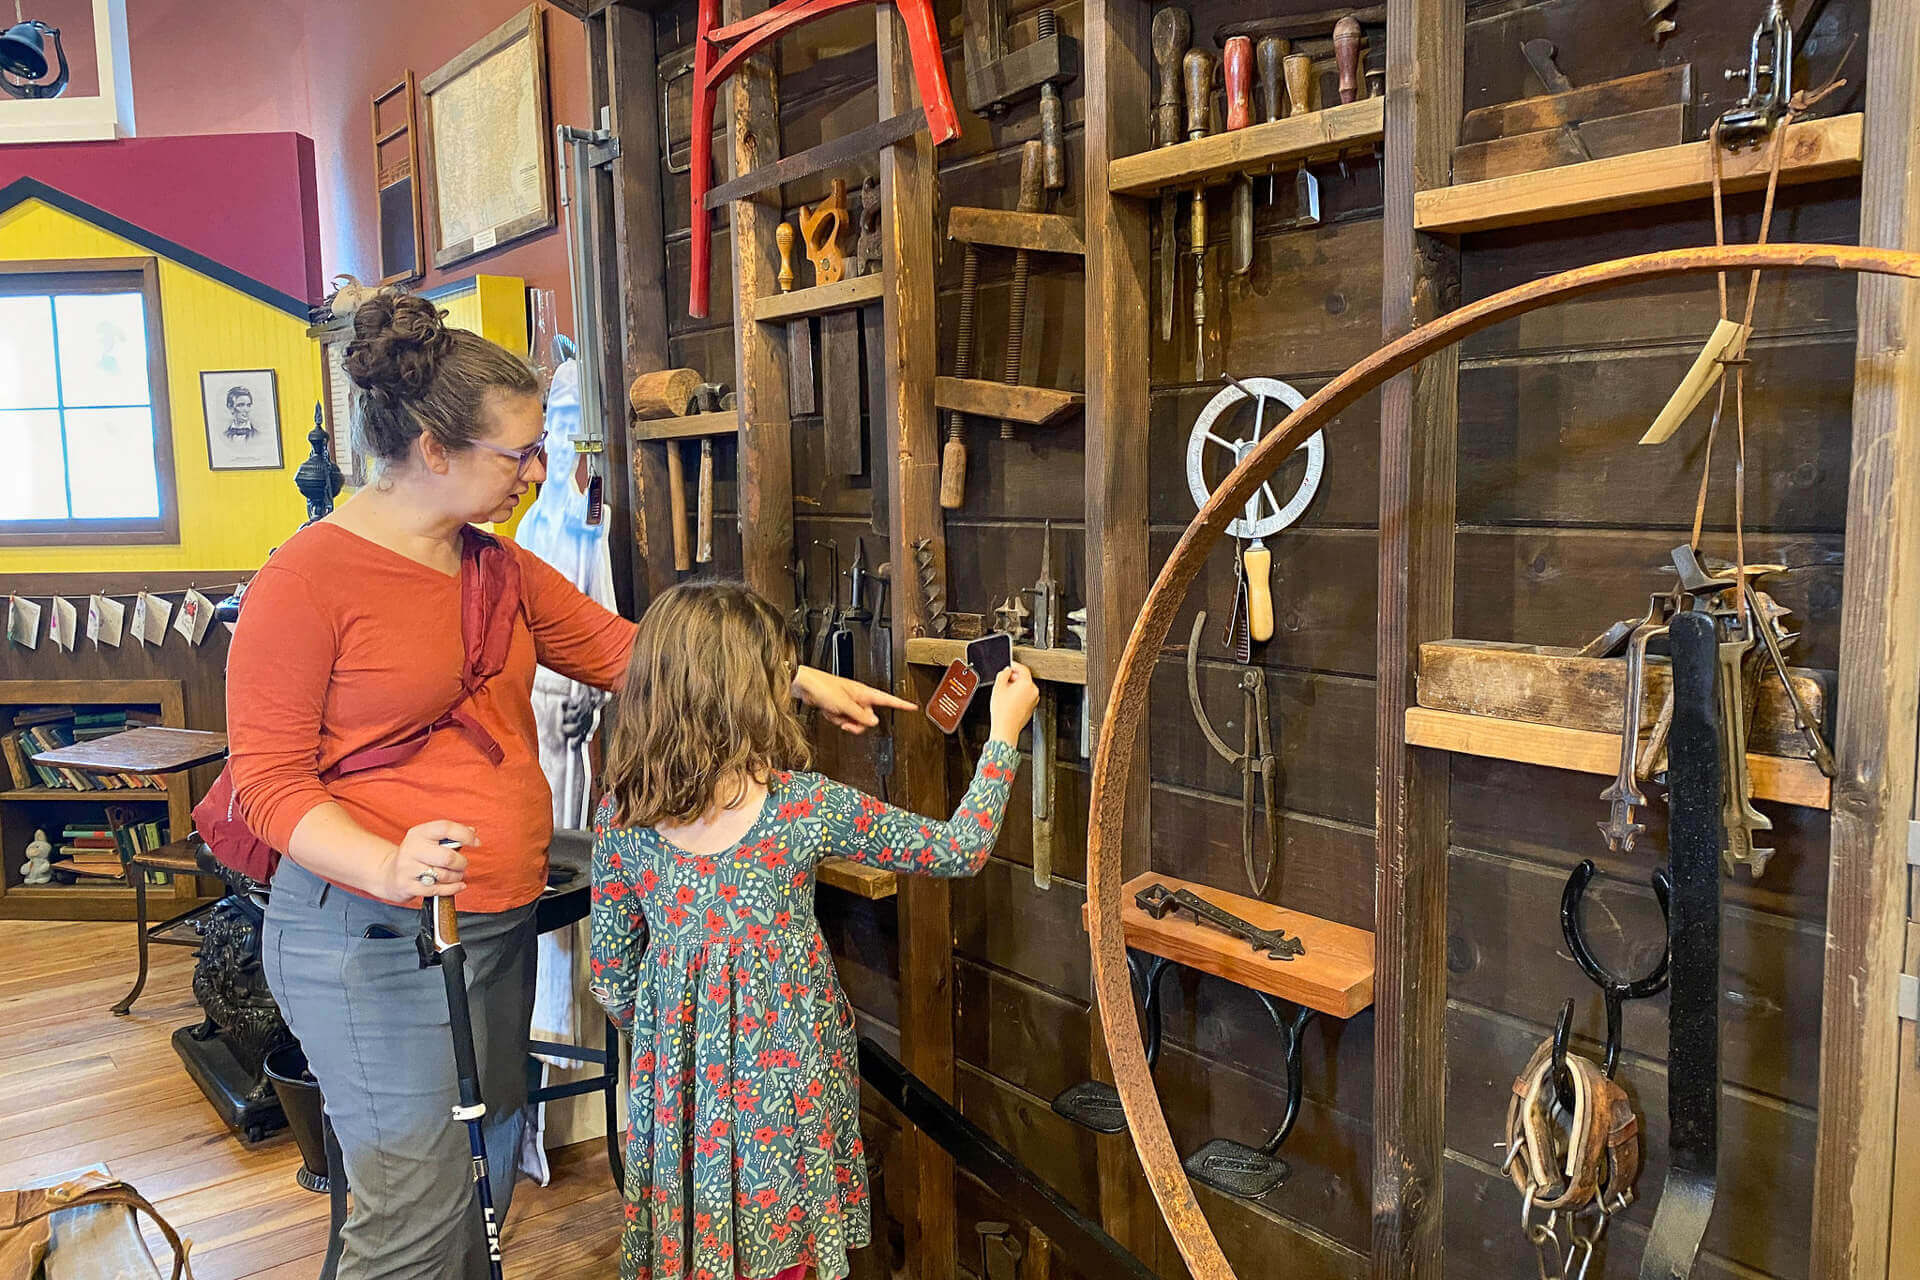 A mother and daughter look at an exhibit at the Raymond Carriage Museum